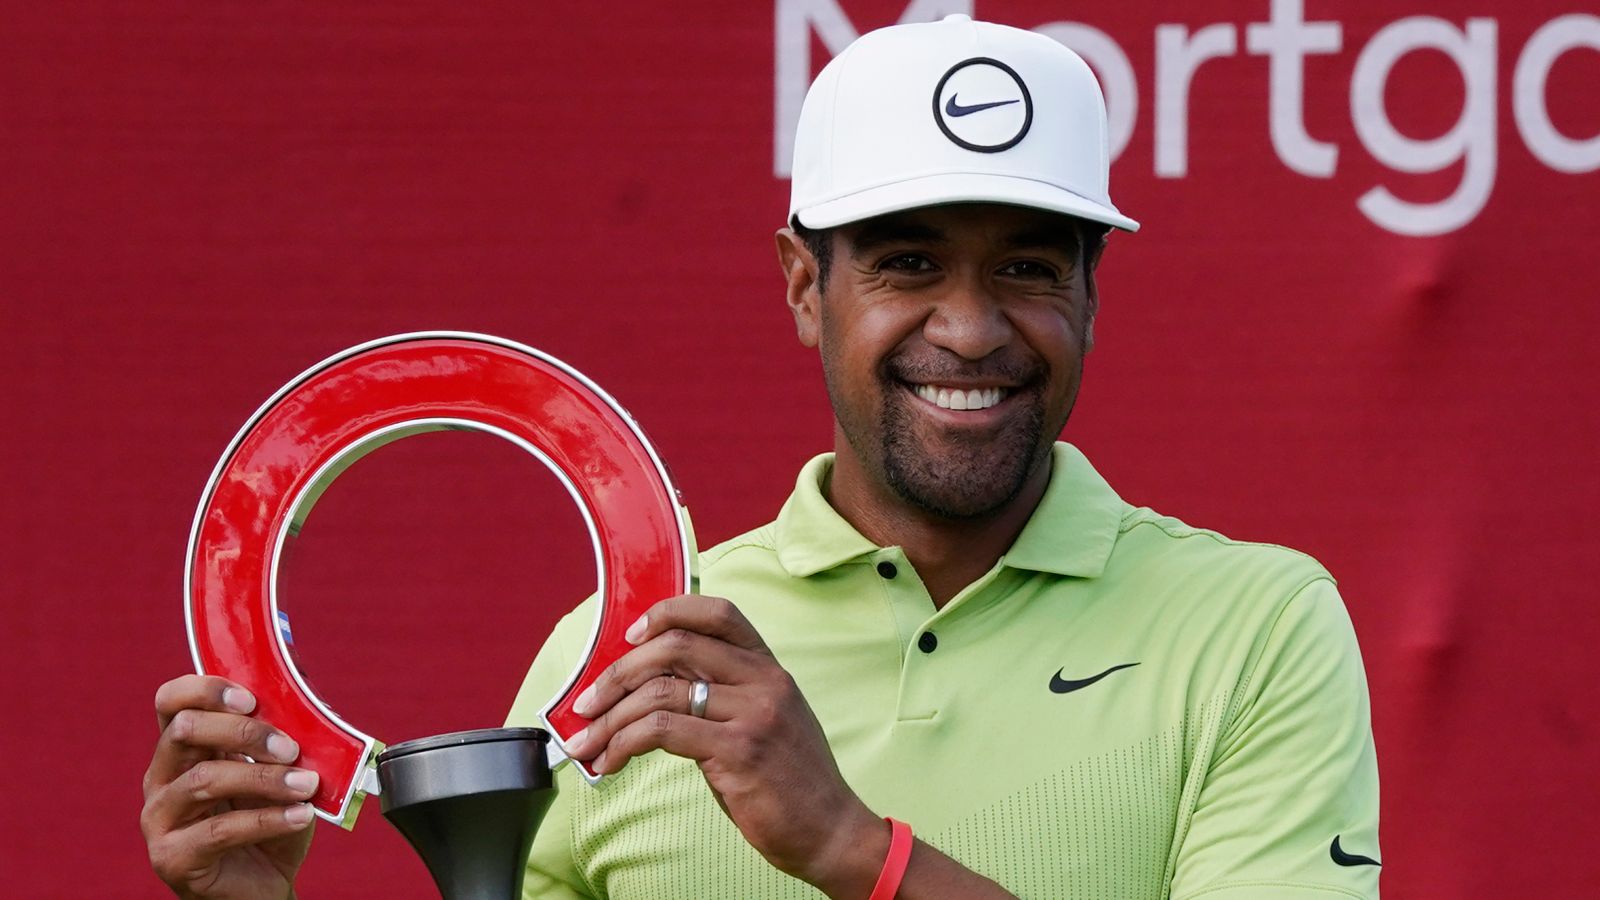 Rocket Mortgage Classic: Tony Finau secures back-to-back PGA Tour titles with five-shot win